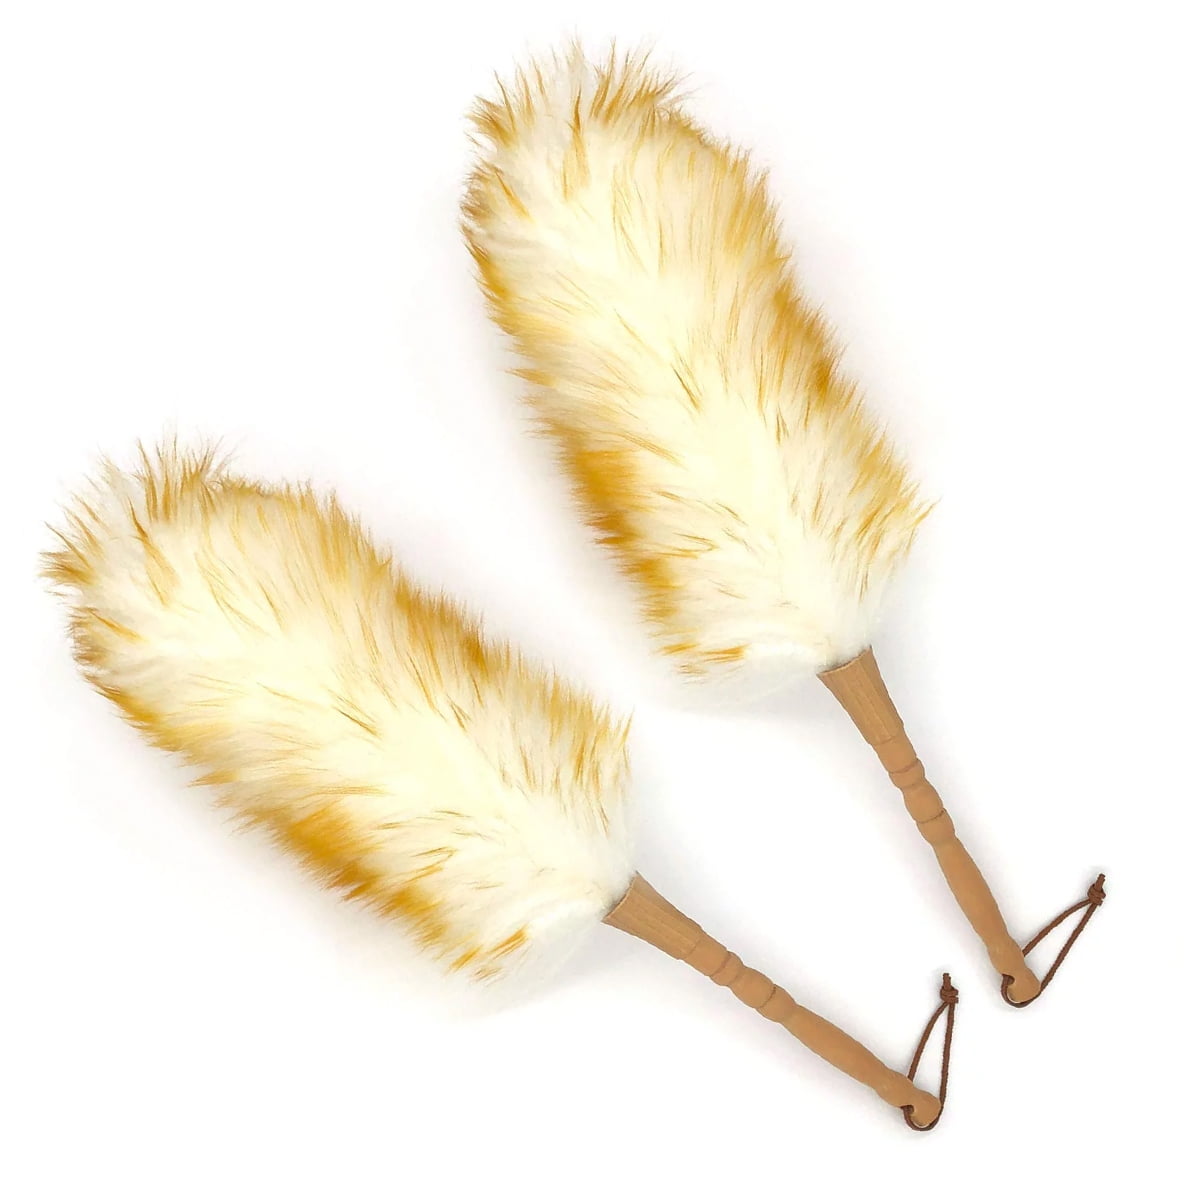 Wool Lambswool Feather Brush, Anti-Static Duster Dust Sweeping Cleaning  Tool with Wood Handle and Hanging Rope for Home Furniture